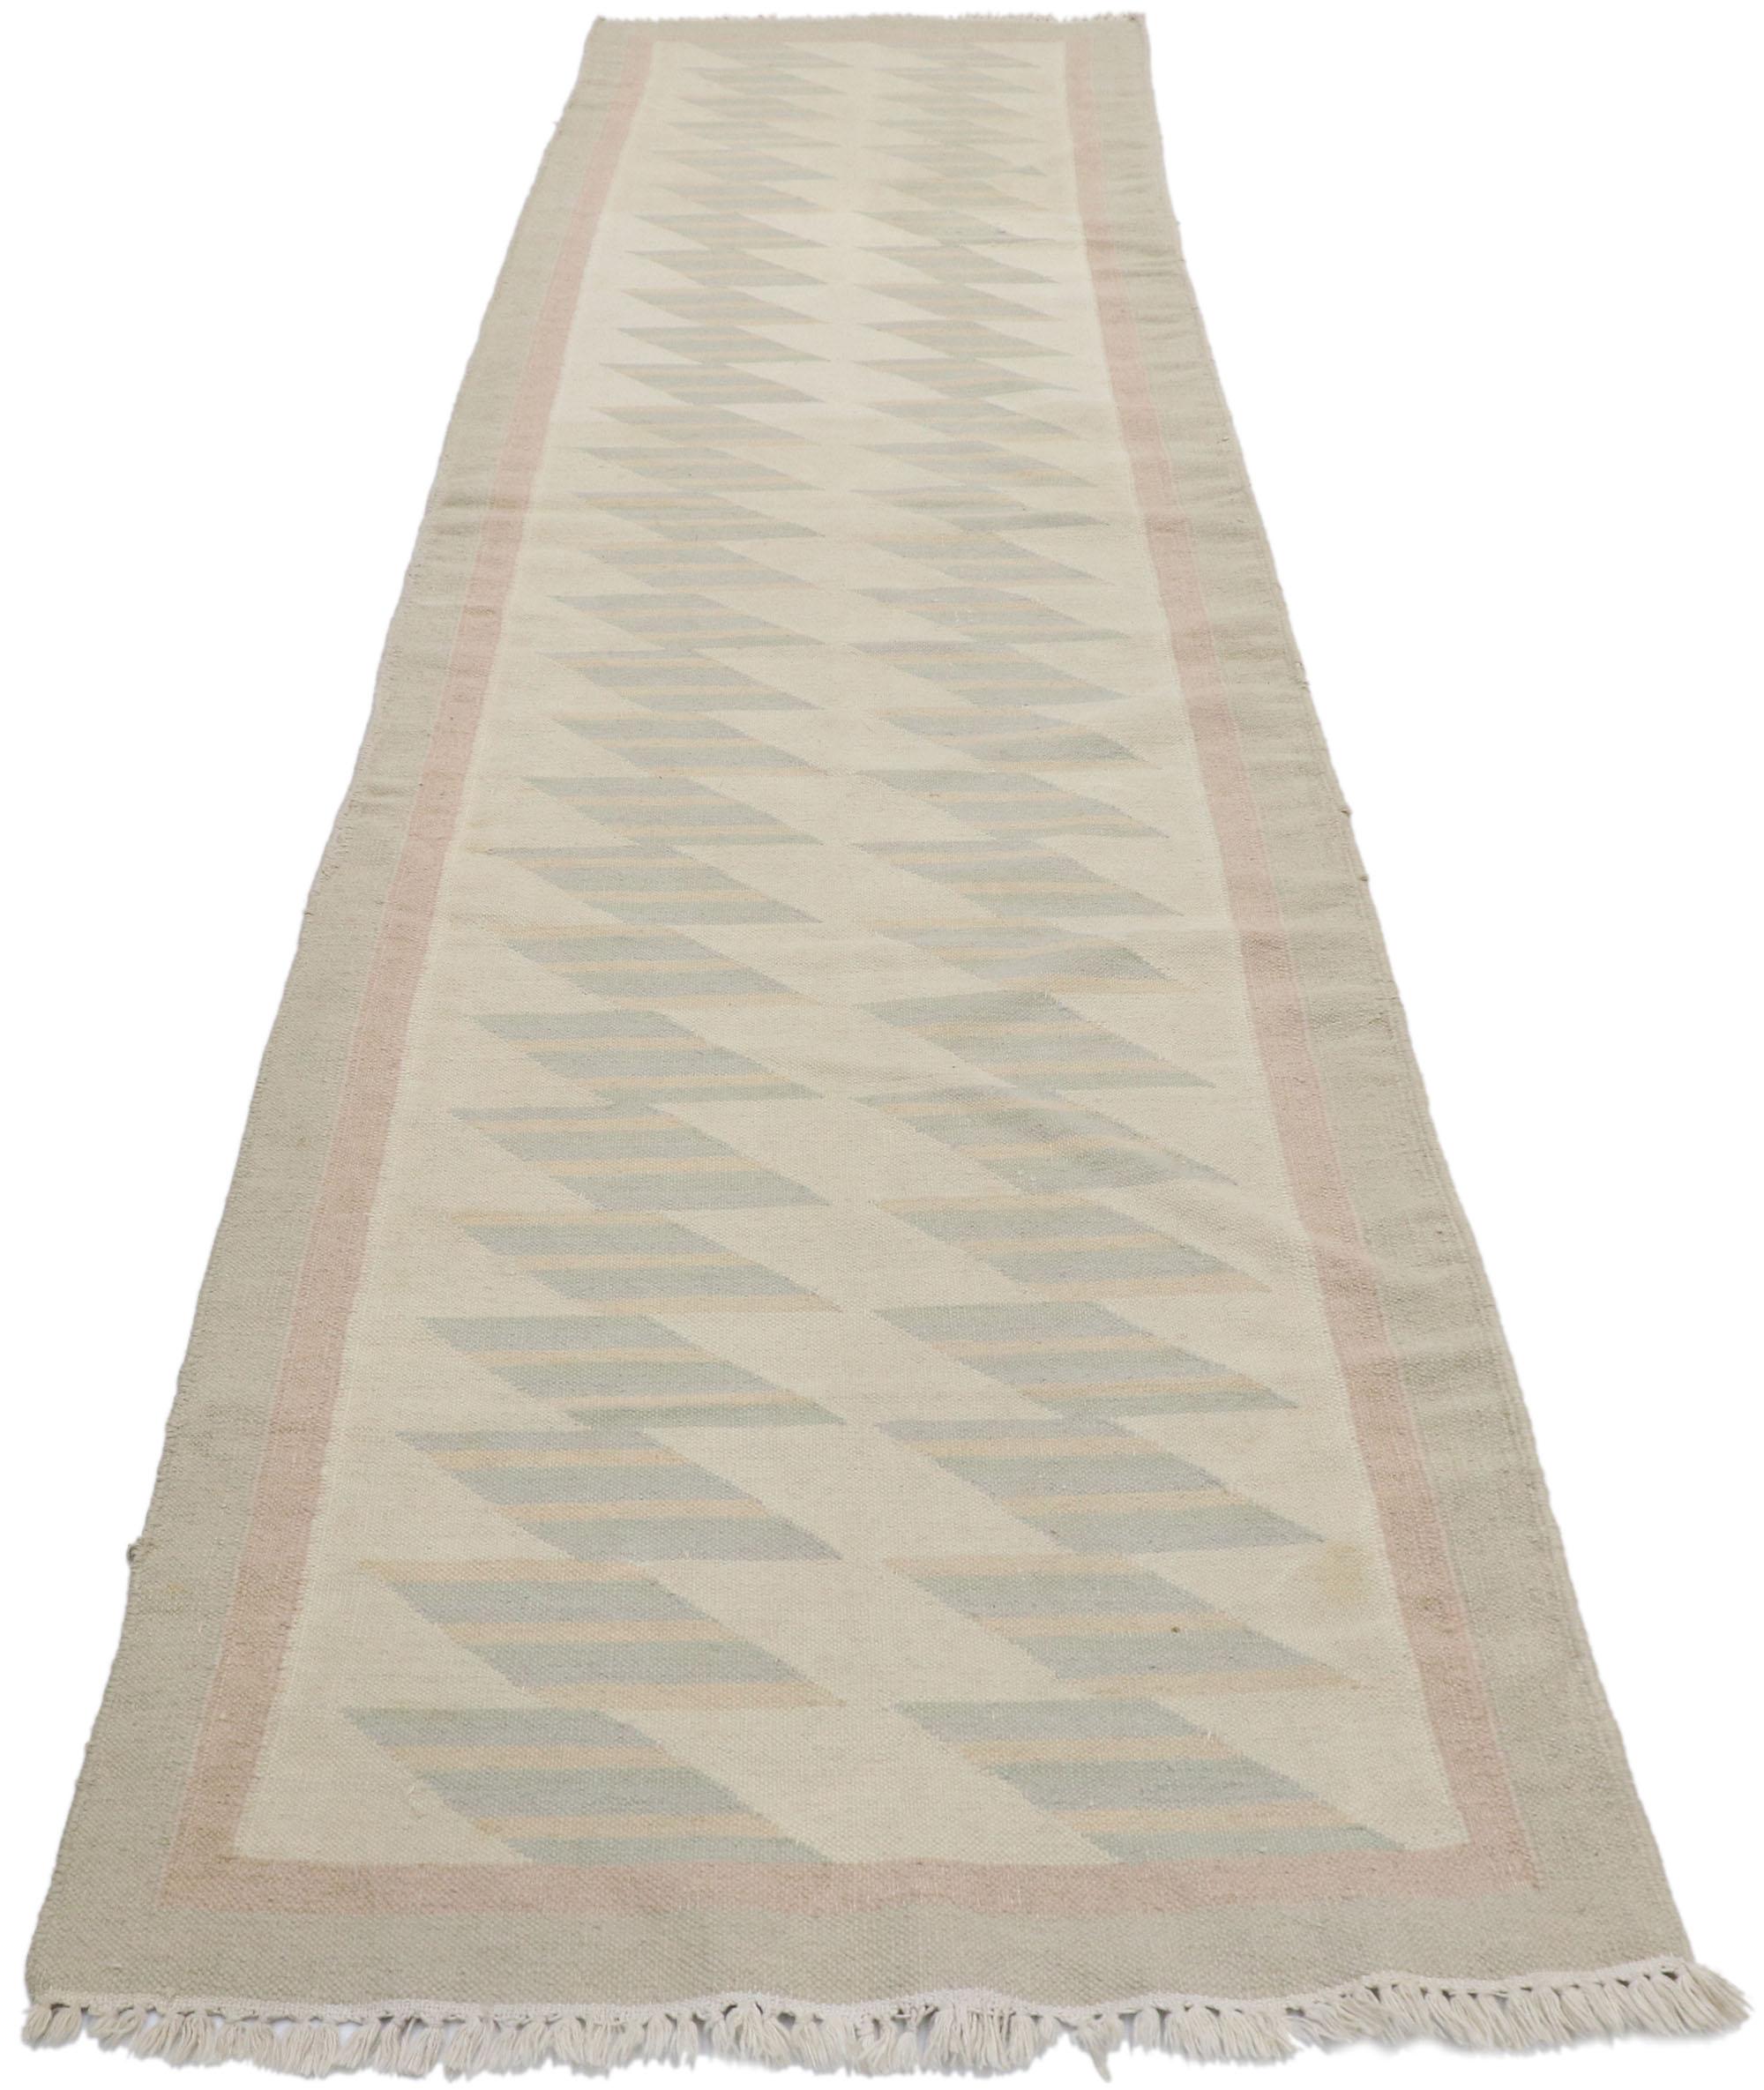 Hand-Woven Vintage Persian Shiraz Kilim Runner with Southwestern Bohemian Style For Sale